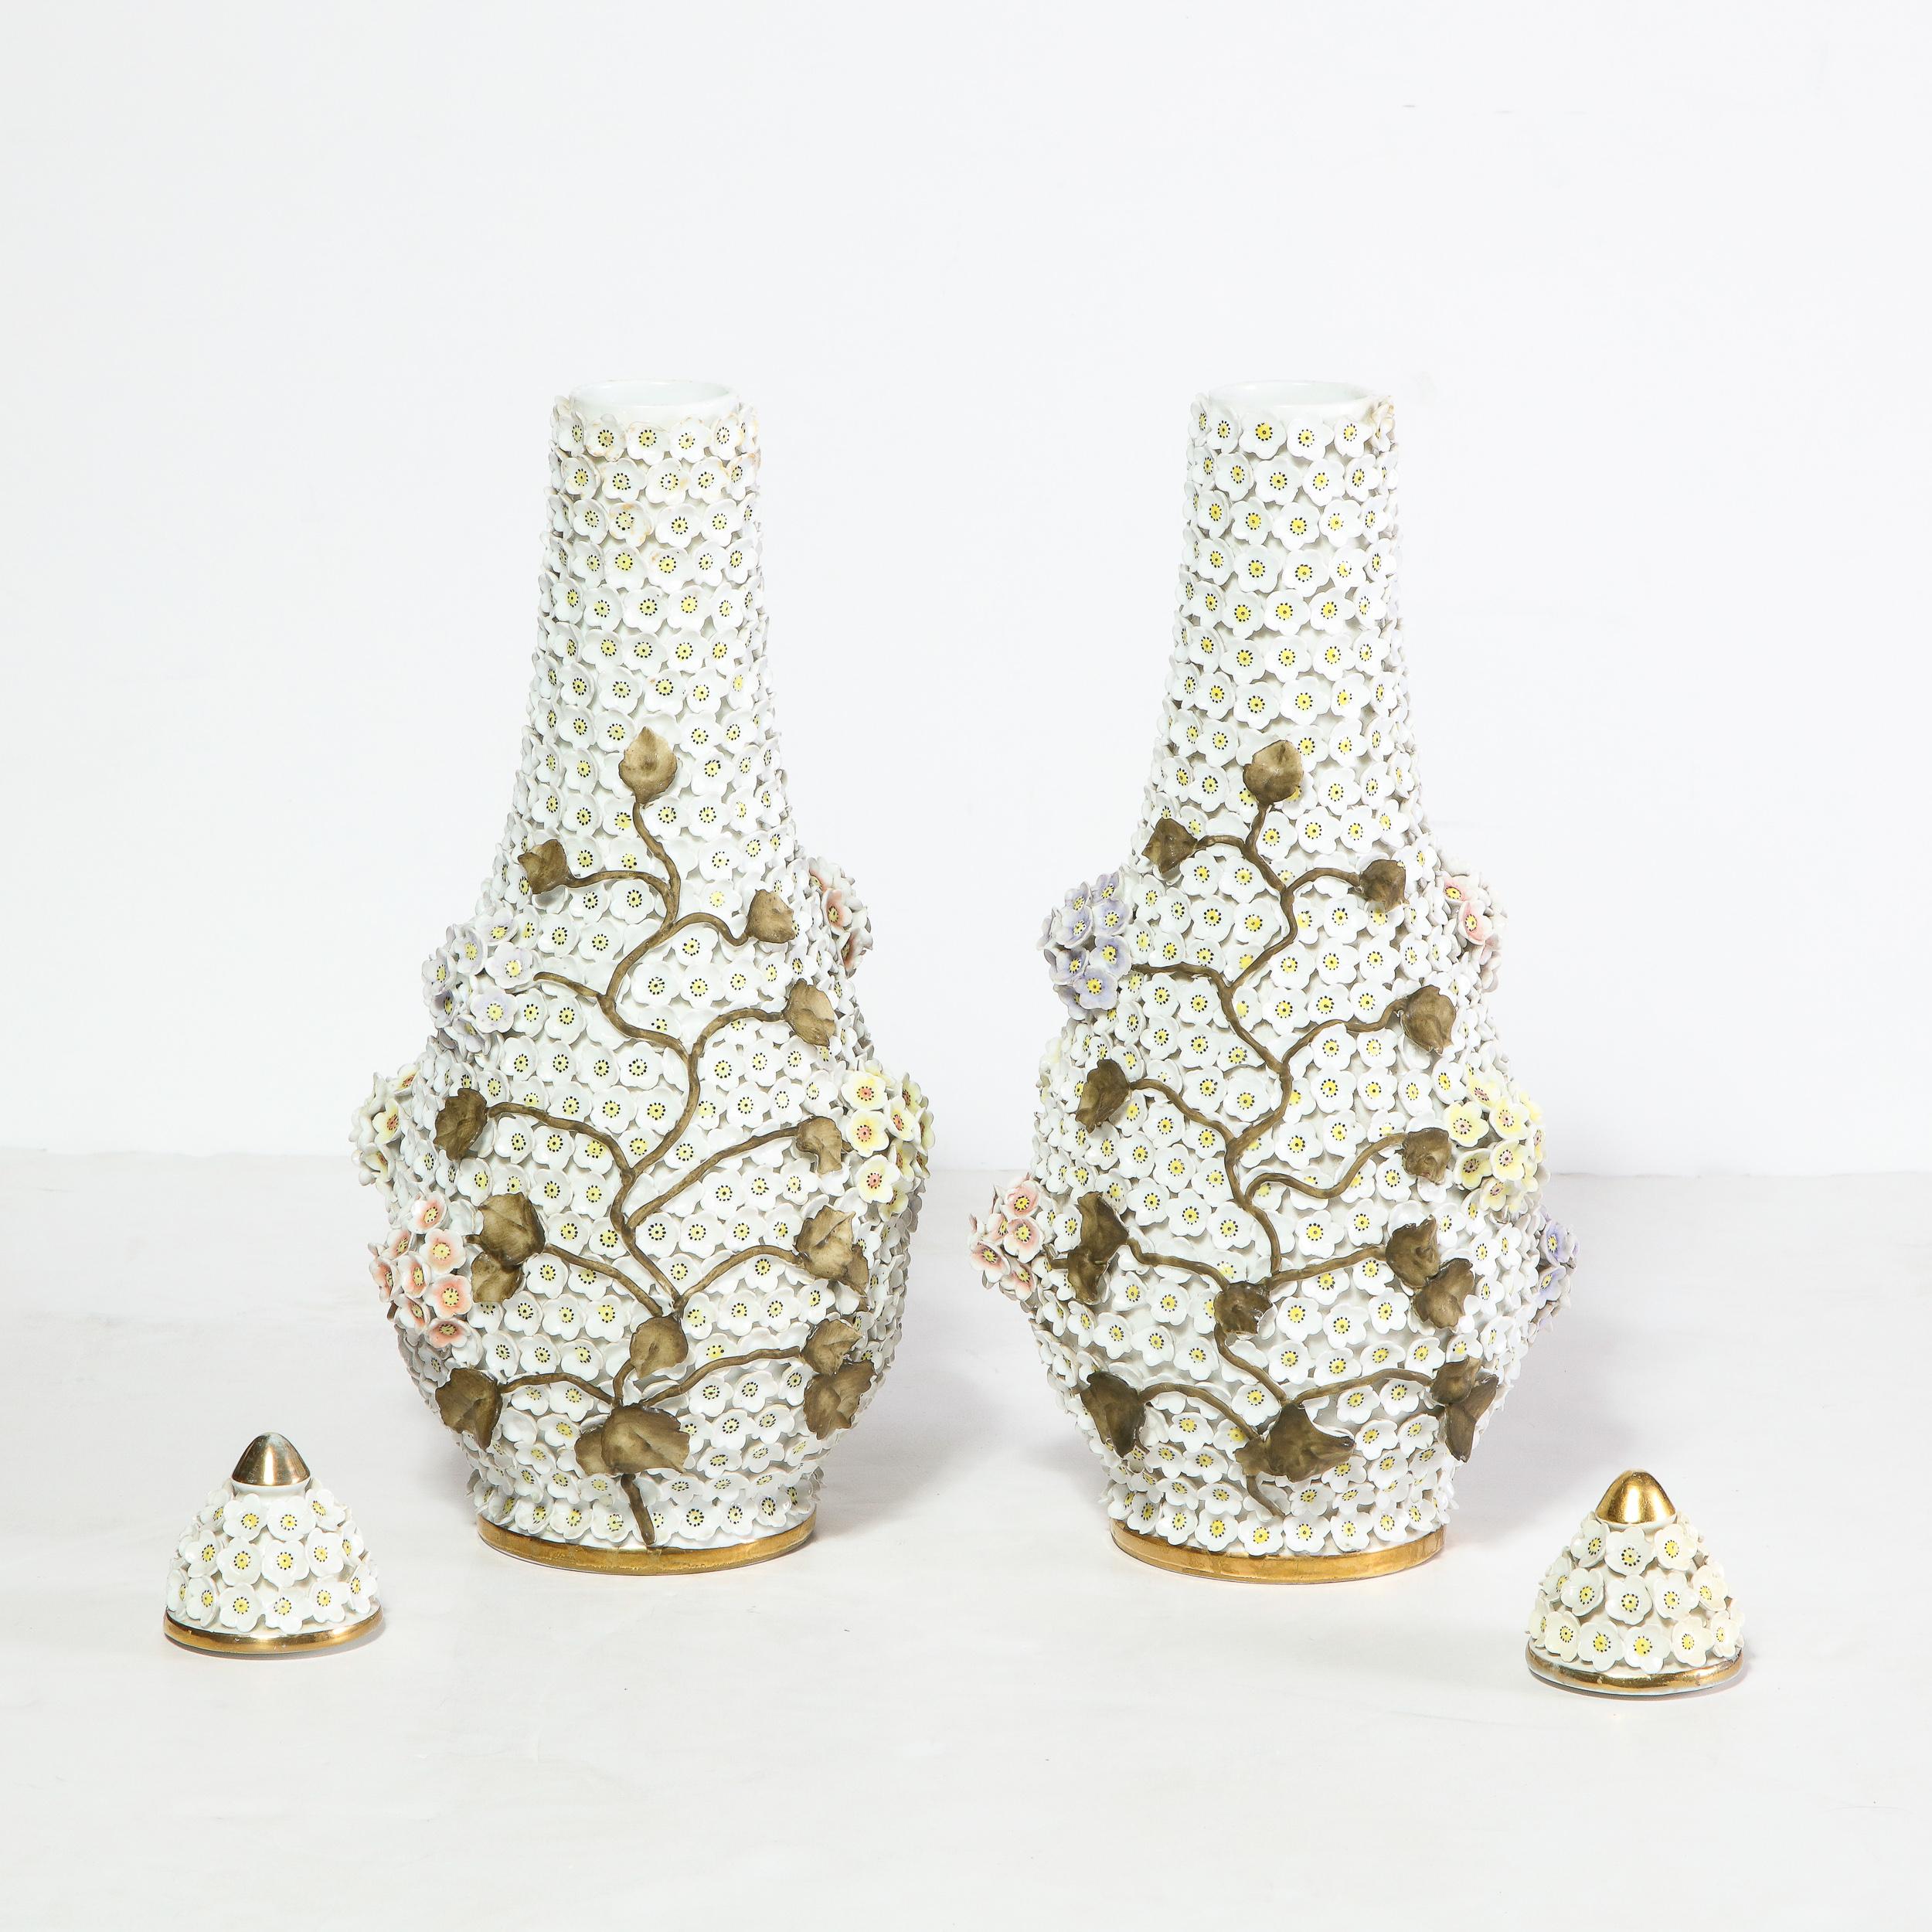 Pair of Handpainted Lidded Snowballen Vases with Gilt accents & Floral Appliques 4